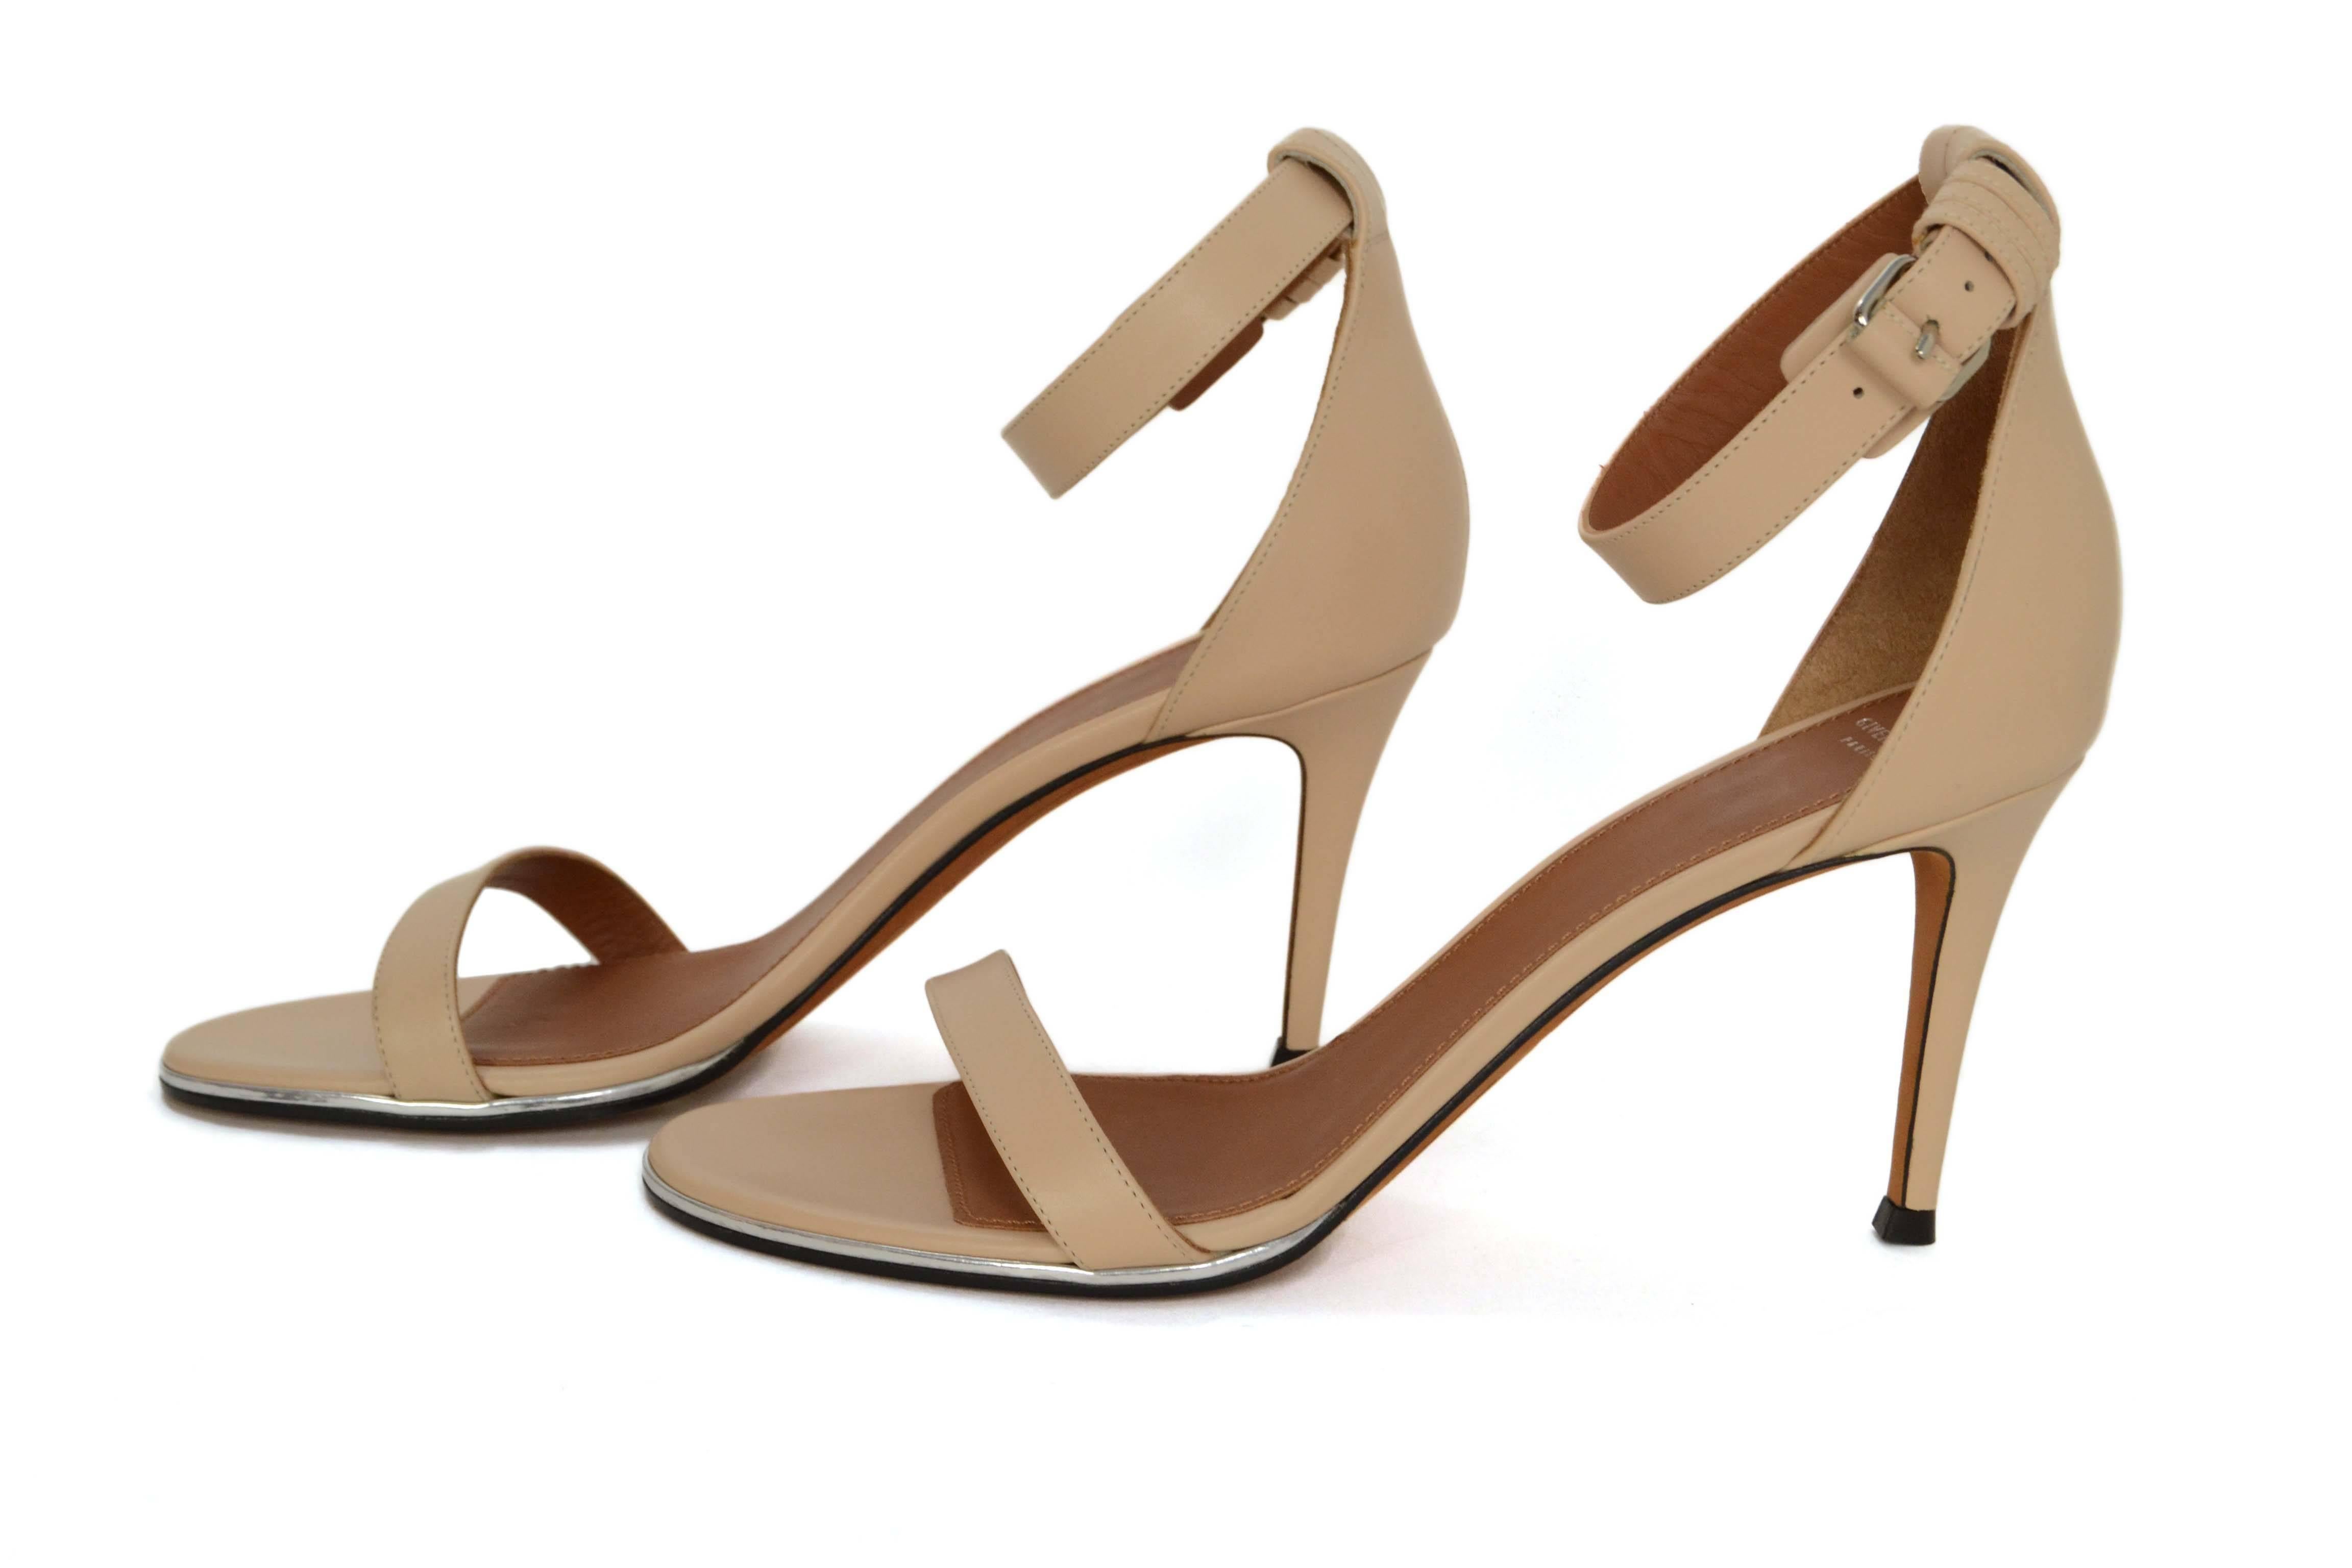 Givenchy Nude Leather Sandals 
Made In: Italy
Color: Nude
Materials: Leather
Closure: Ankle stamp with buckle and notch closure
Sole Stamp: Givenchy Paris Made in Italy 38.5
Retail Price: $695 + tax
Overall Condition: Excellent pre-owned